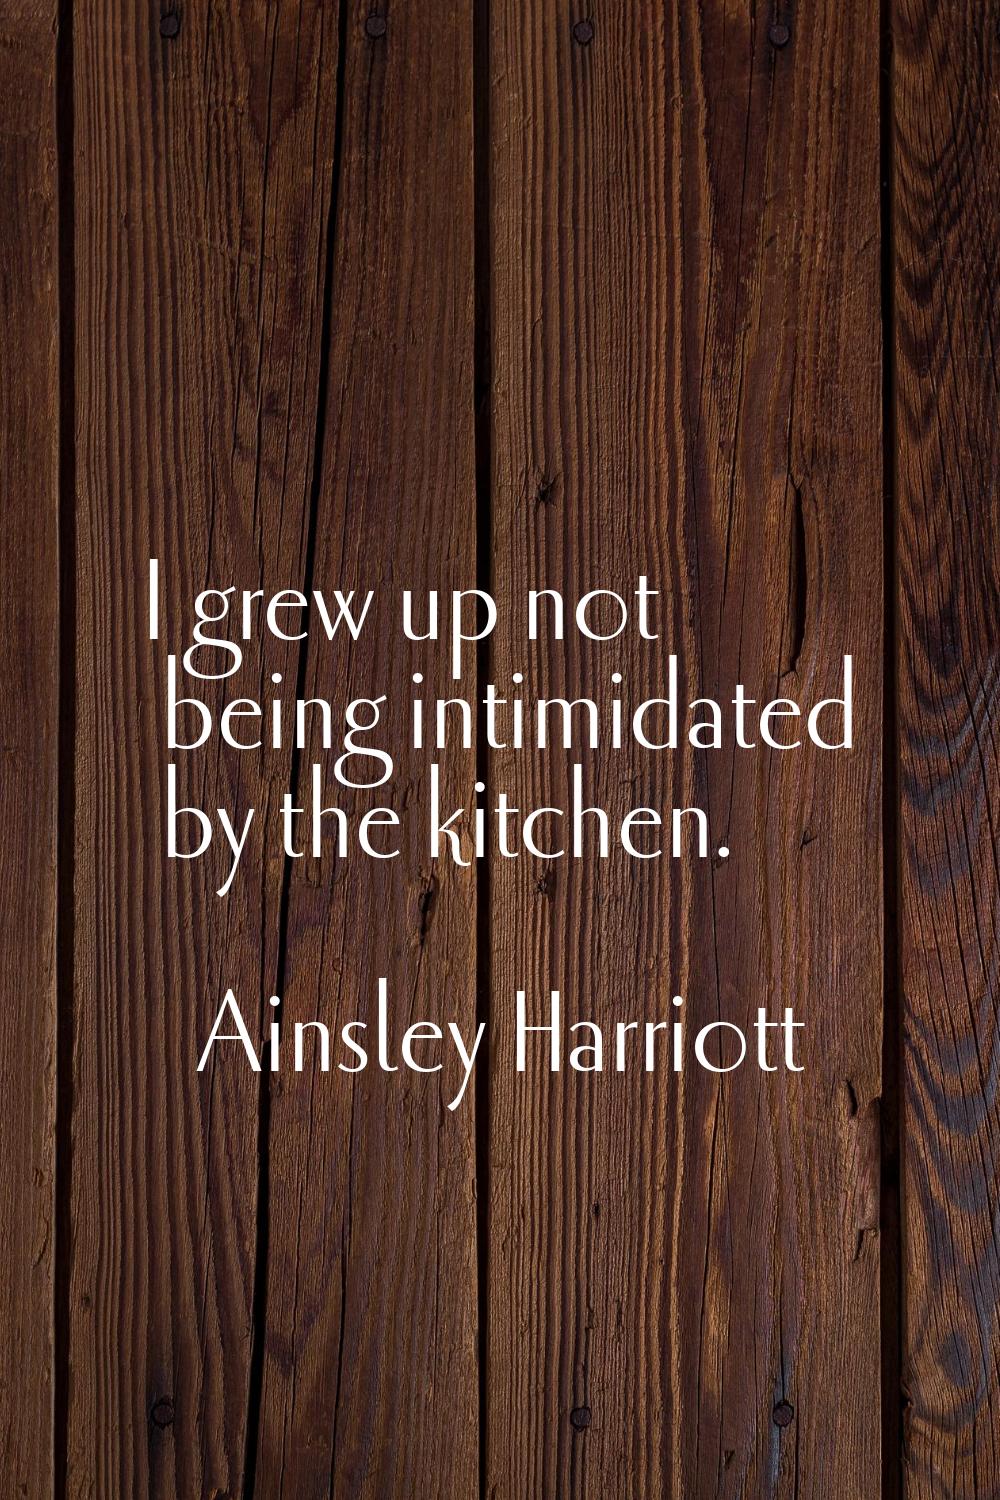 I grew up not being intimidated by the kitchen.